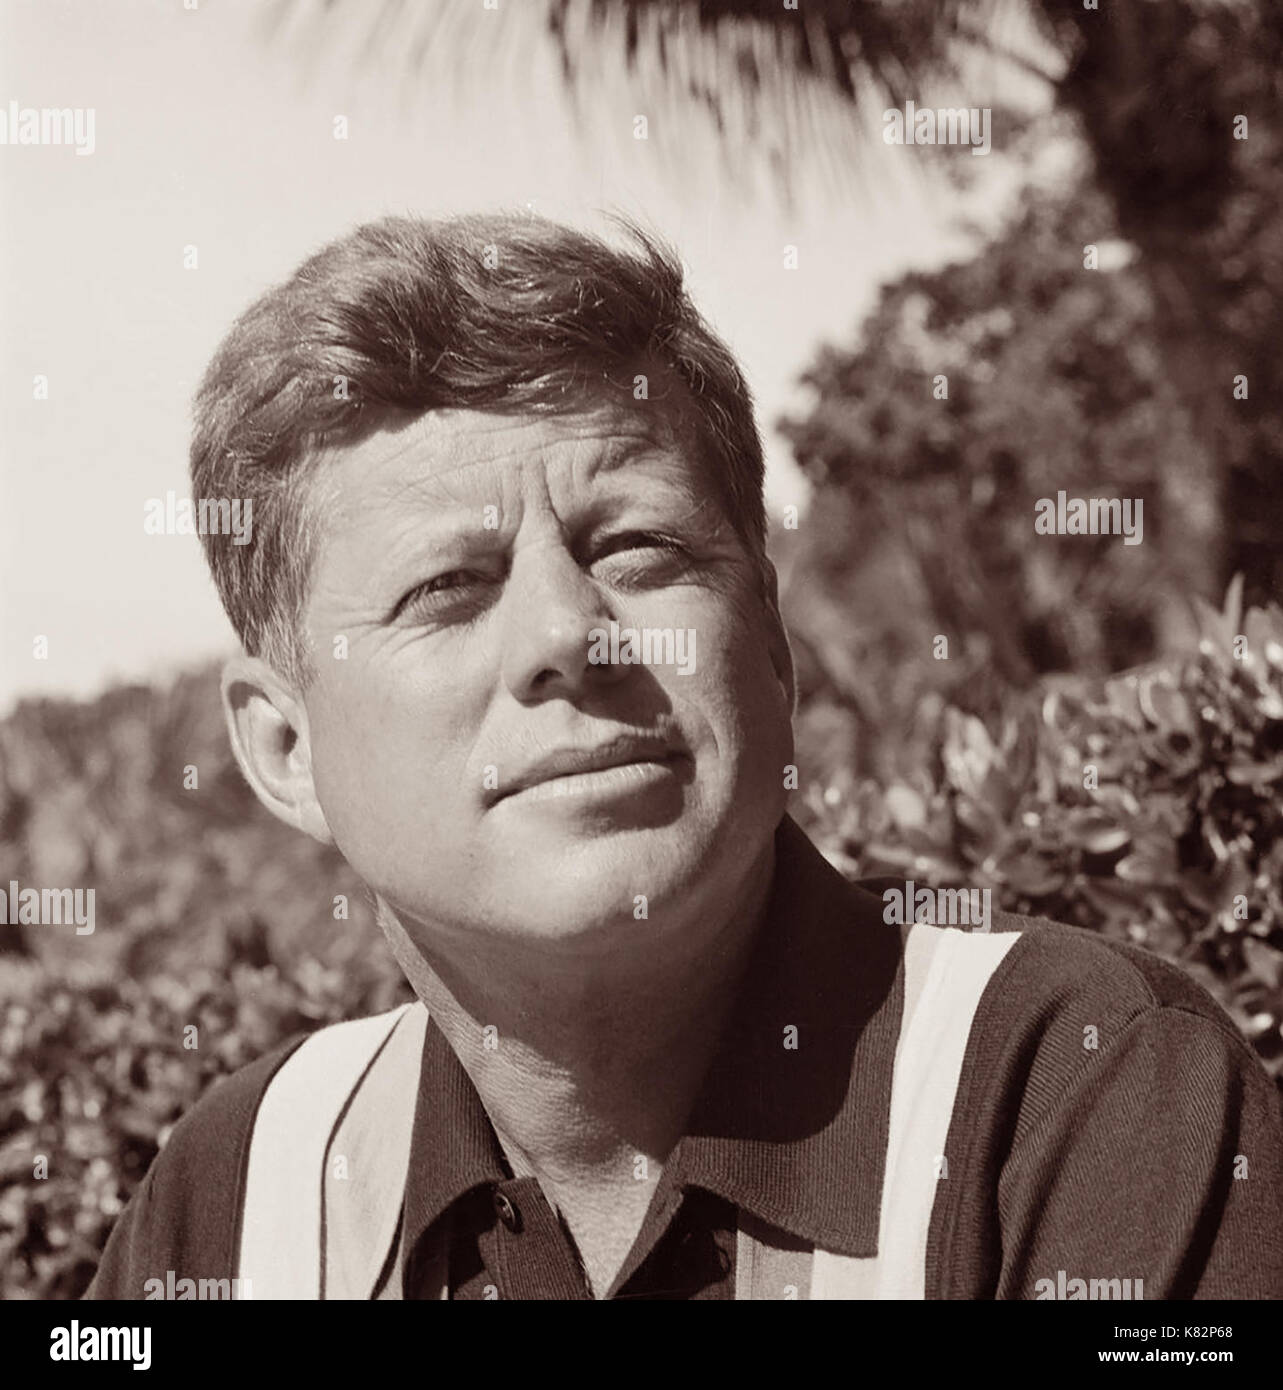 Portrait of United States President John F. Kennedy in Palm Beach, Florida on January 7, 1963. Stock Photo